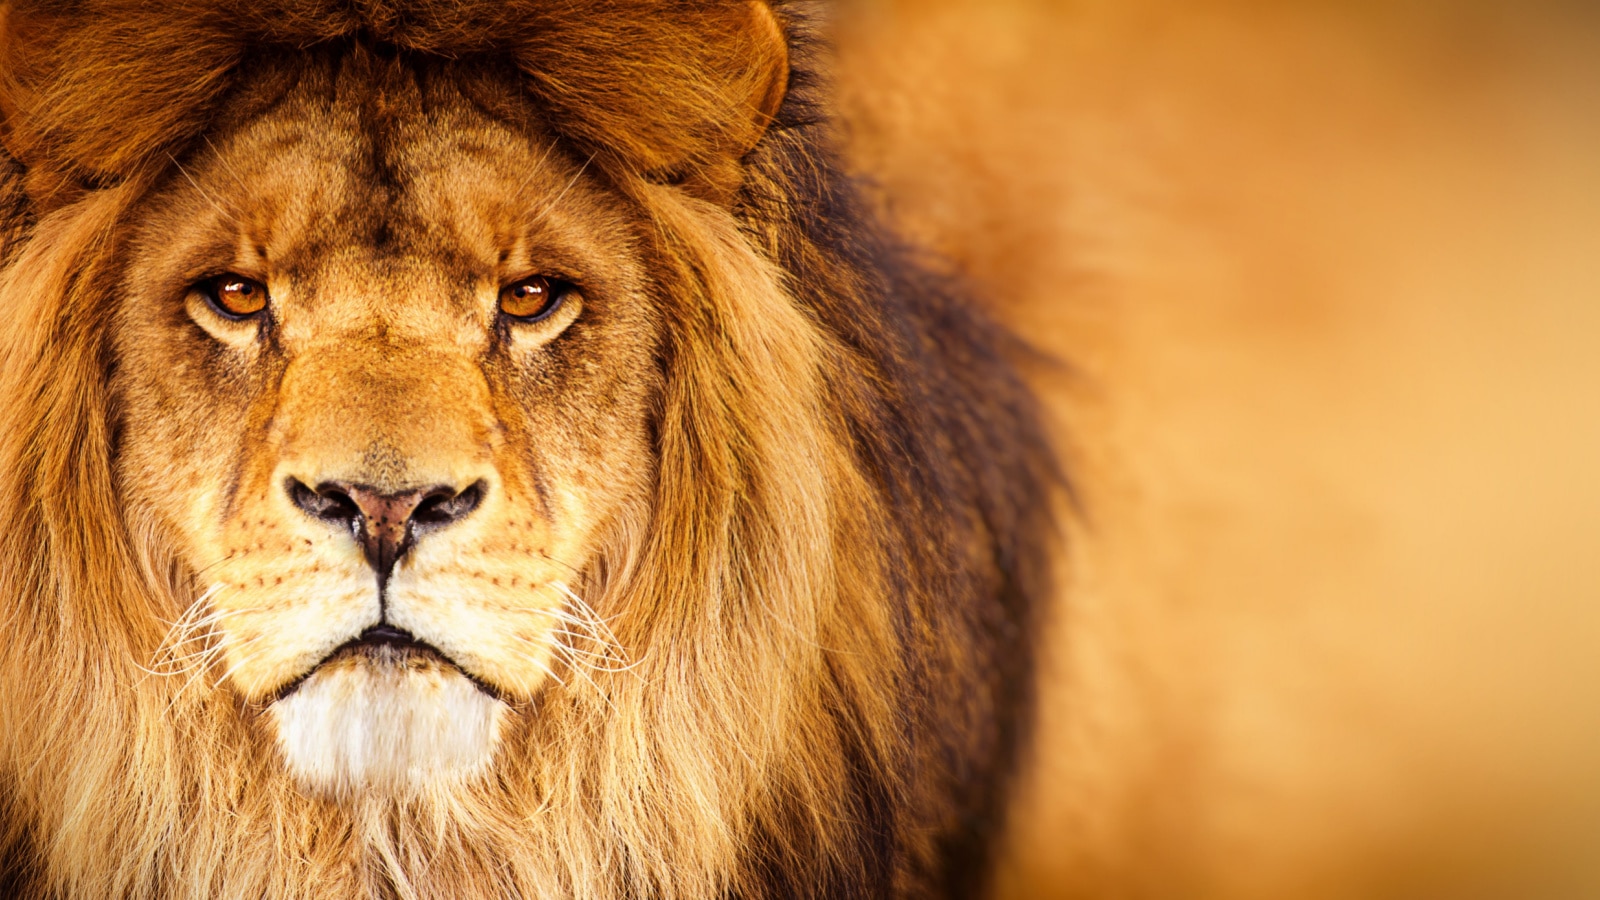 <p>You'll identify this pride of the African wilderness with its distinct brownish-yellow color. This is unlike the cinnamon and white-chested mountain lions prowling the woods of the United States.</p><p>One unique feature of the African male lions you should watch for is the thick black and brown manes that protect their necks when in a bout competing for food, territory, or sex. On your safari trip, you will see them longing in the sun or stalking prey in the hunt for the next meal.</p>